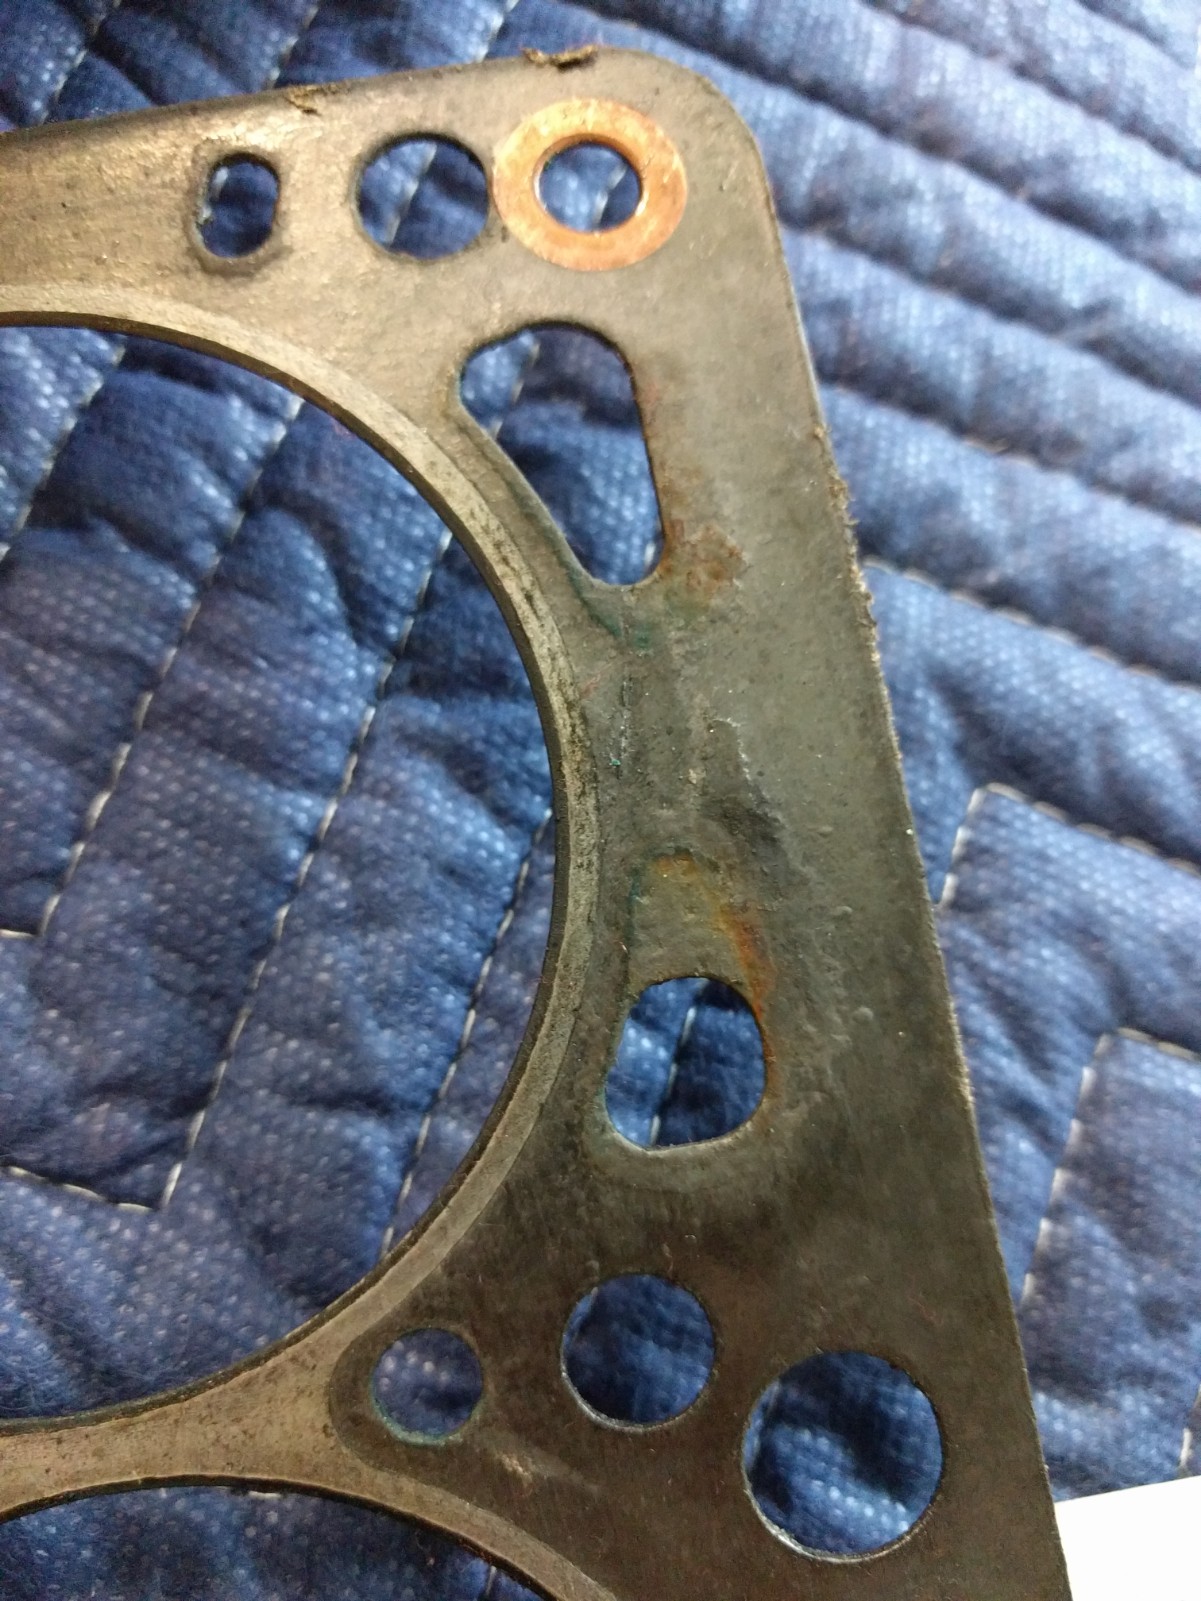 Gasket shows signs of water/corrosion around damaged water jackets.